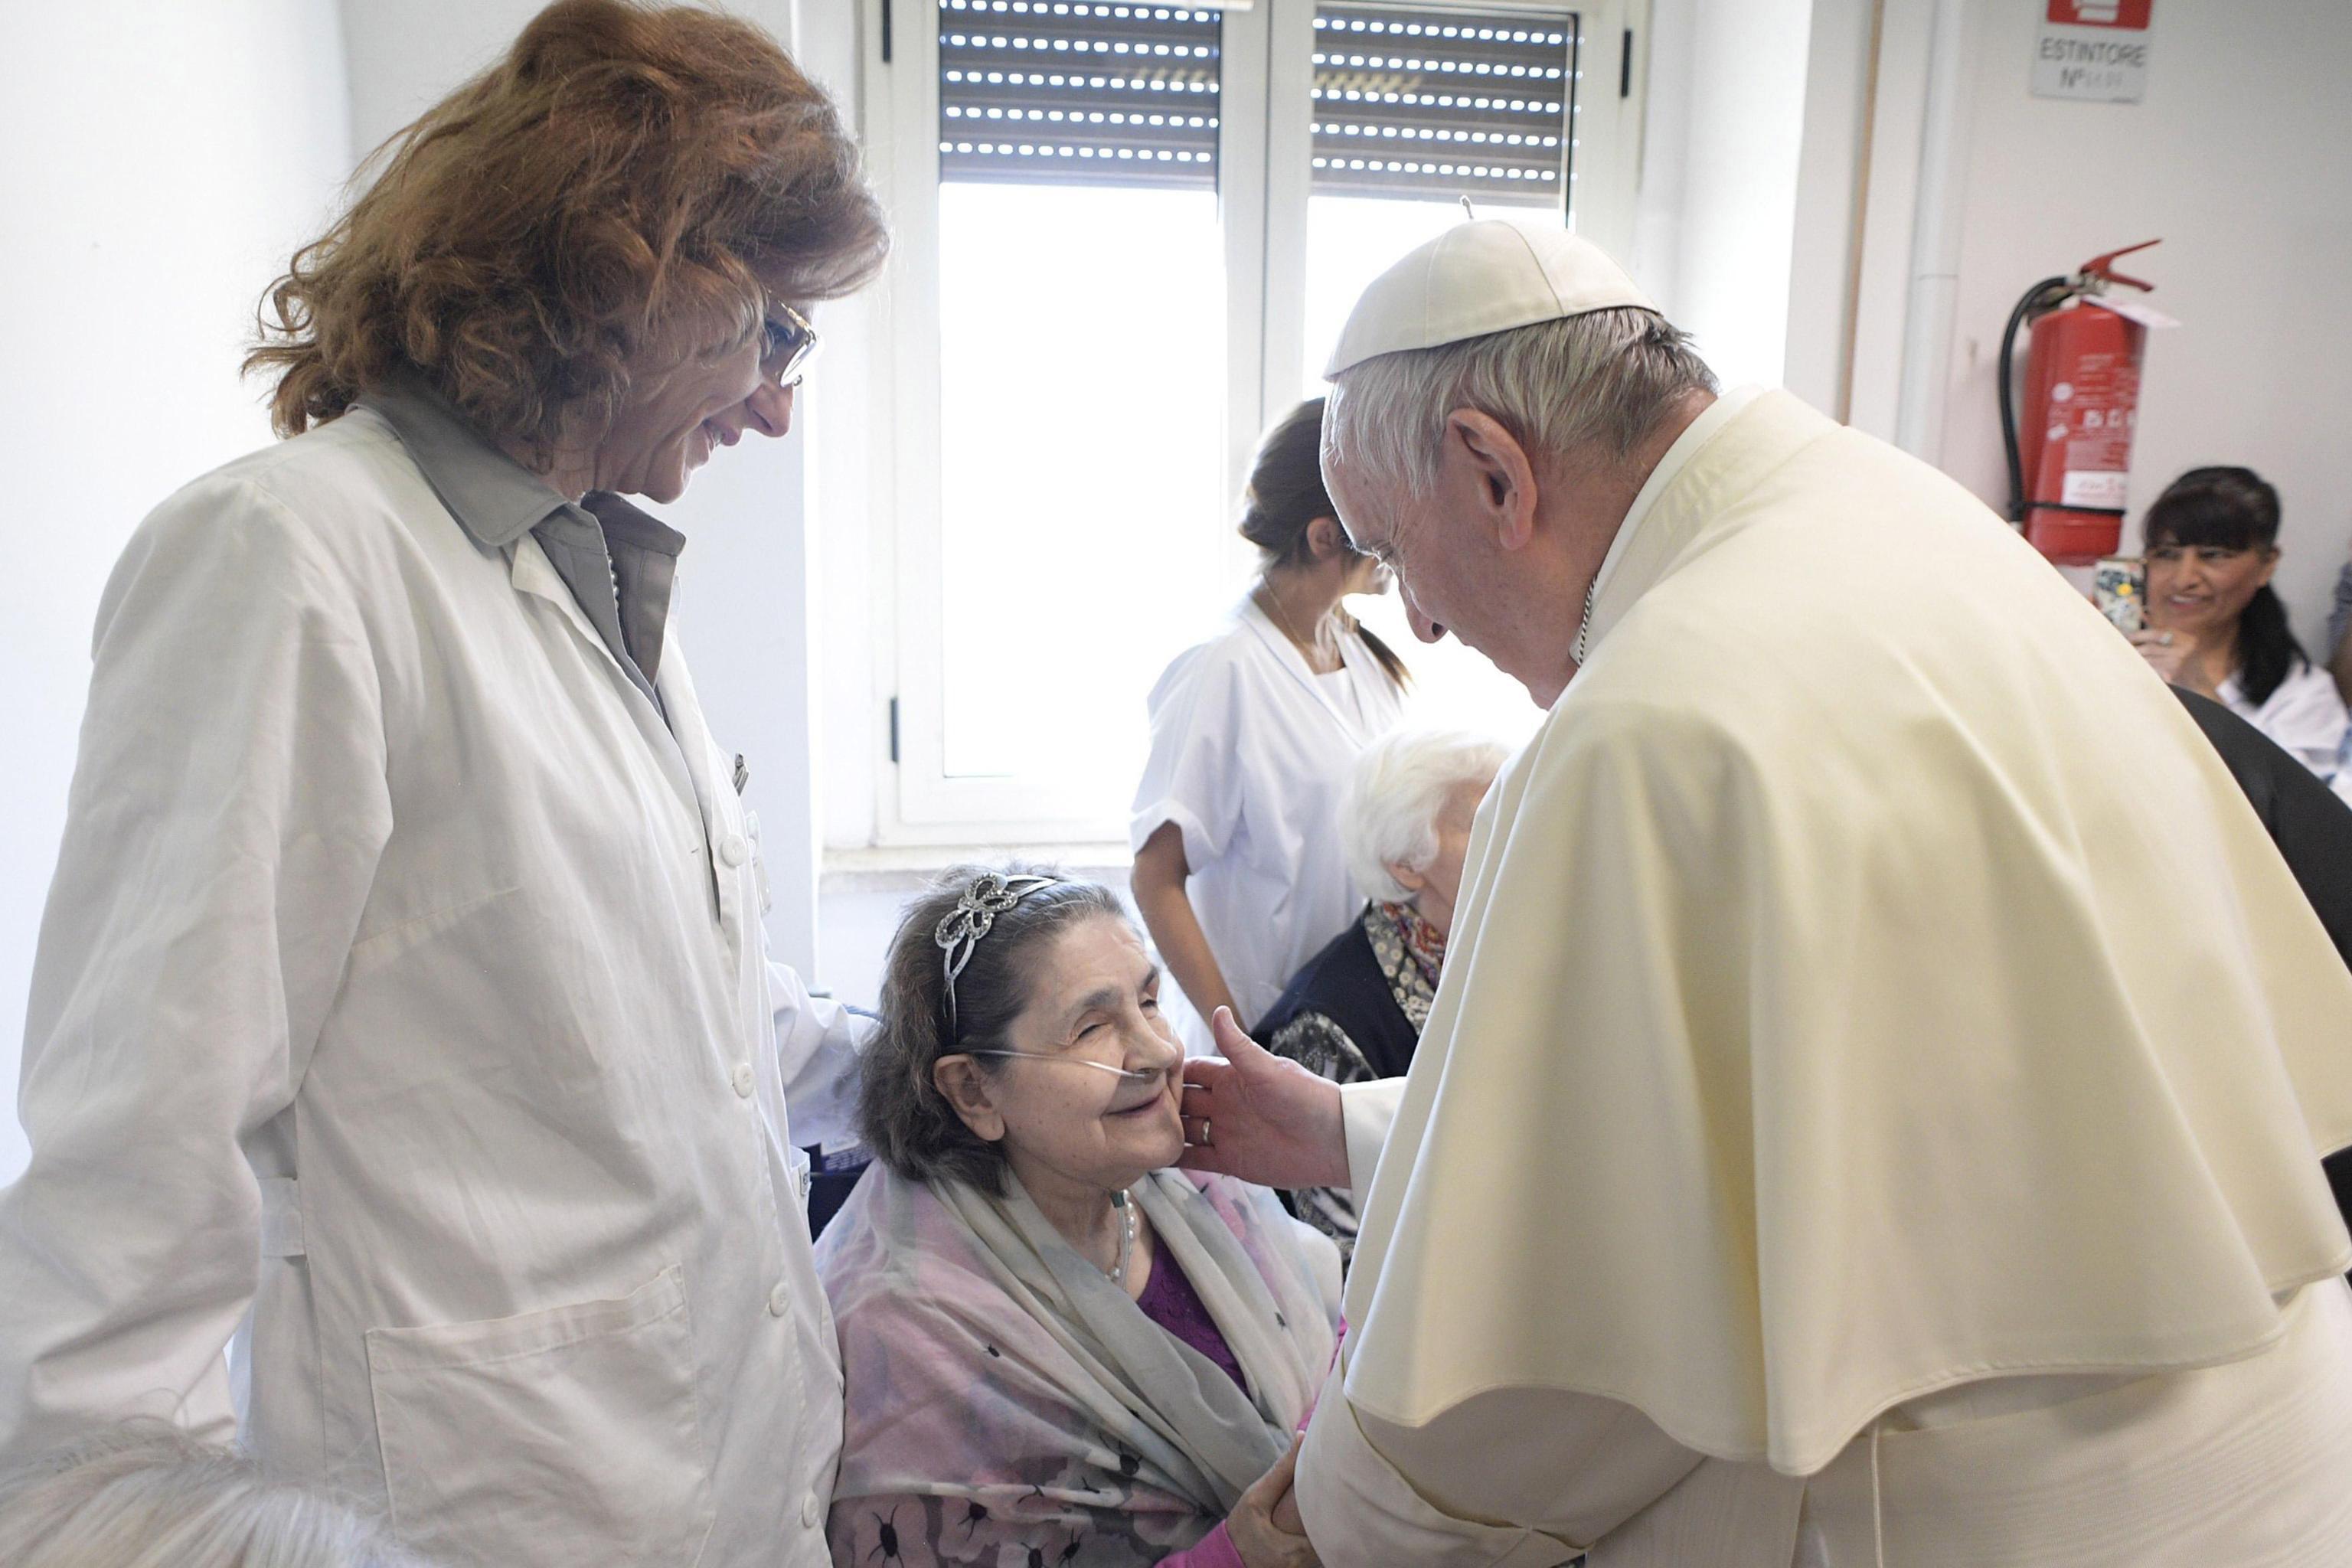 epa05881286 A  handout picture provided by the Vatican newspaper L'Osservatore Romano shows Pope Francis (R) during his visit to the Regional Center Sant'Alessio-Margherita di Savoia, in Rome, Italy, 31 March 2017. The Institute carries out activities aimed at social inclusion of the blind and visually impaired.  EPA/L'OSSERVATORE ROMANO HANDOUT  HANDOUT EDITORIAL USE ONLY/NO SALES